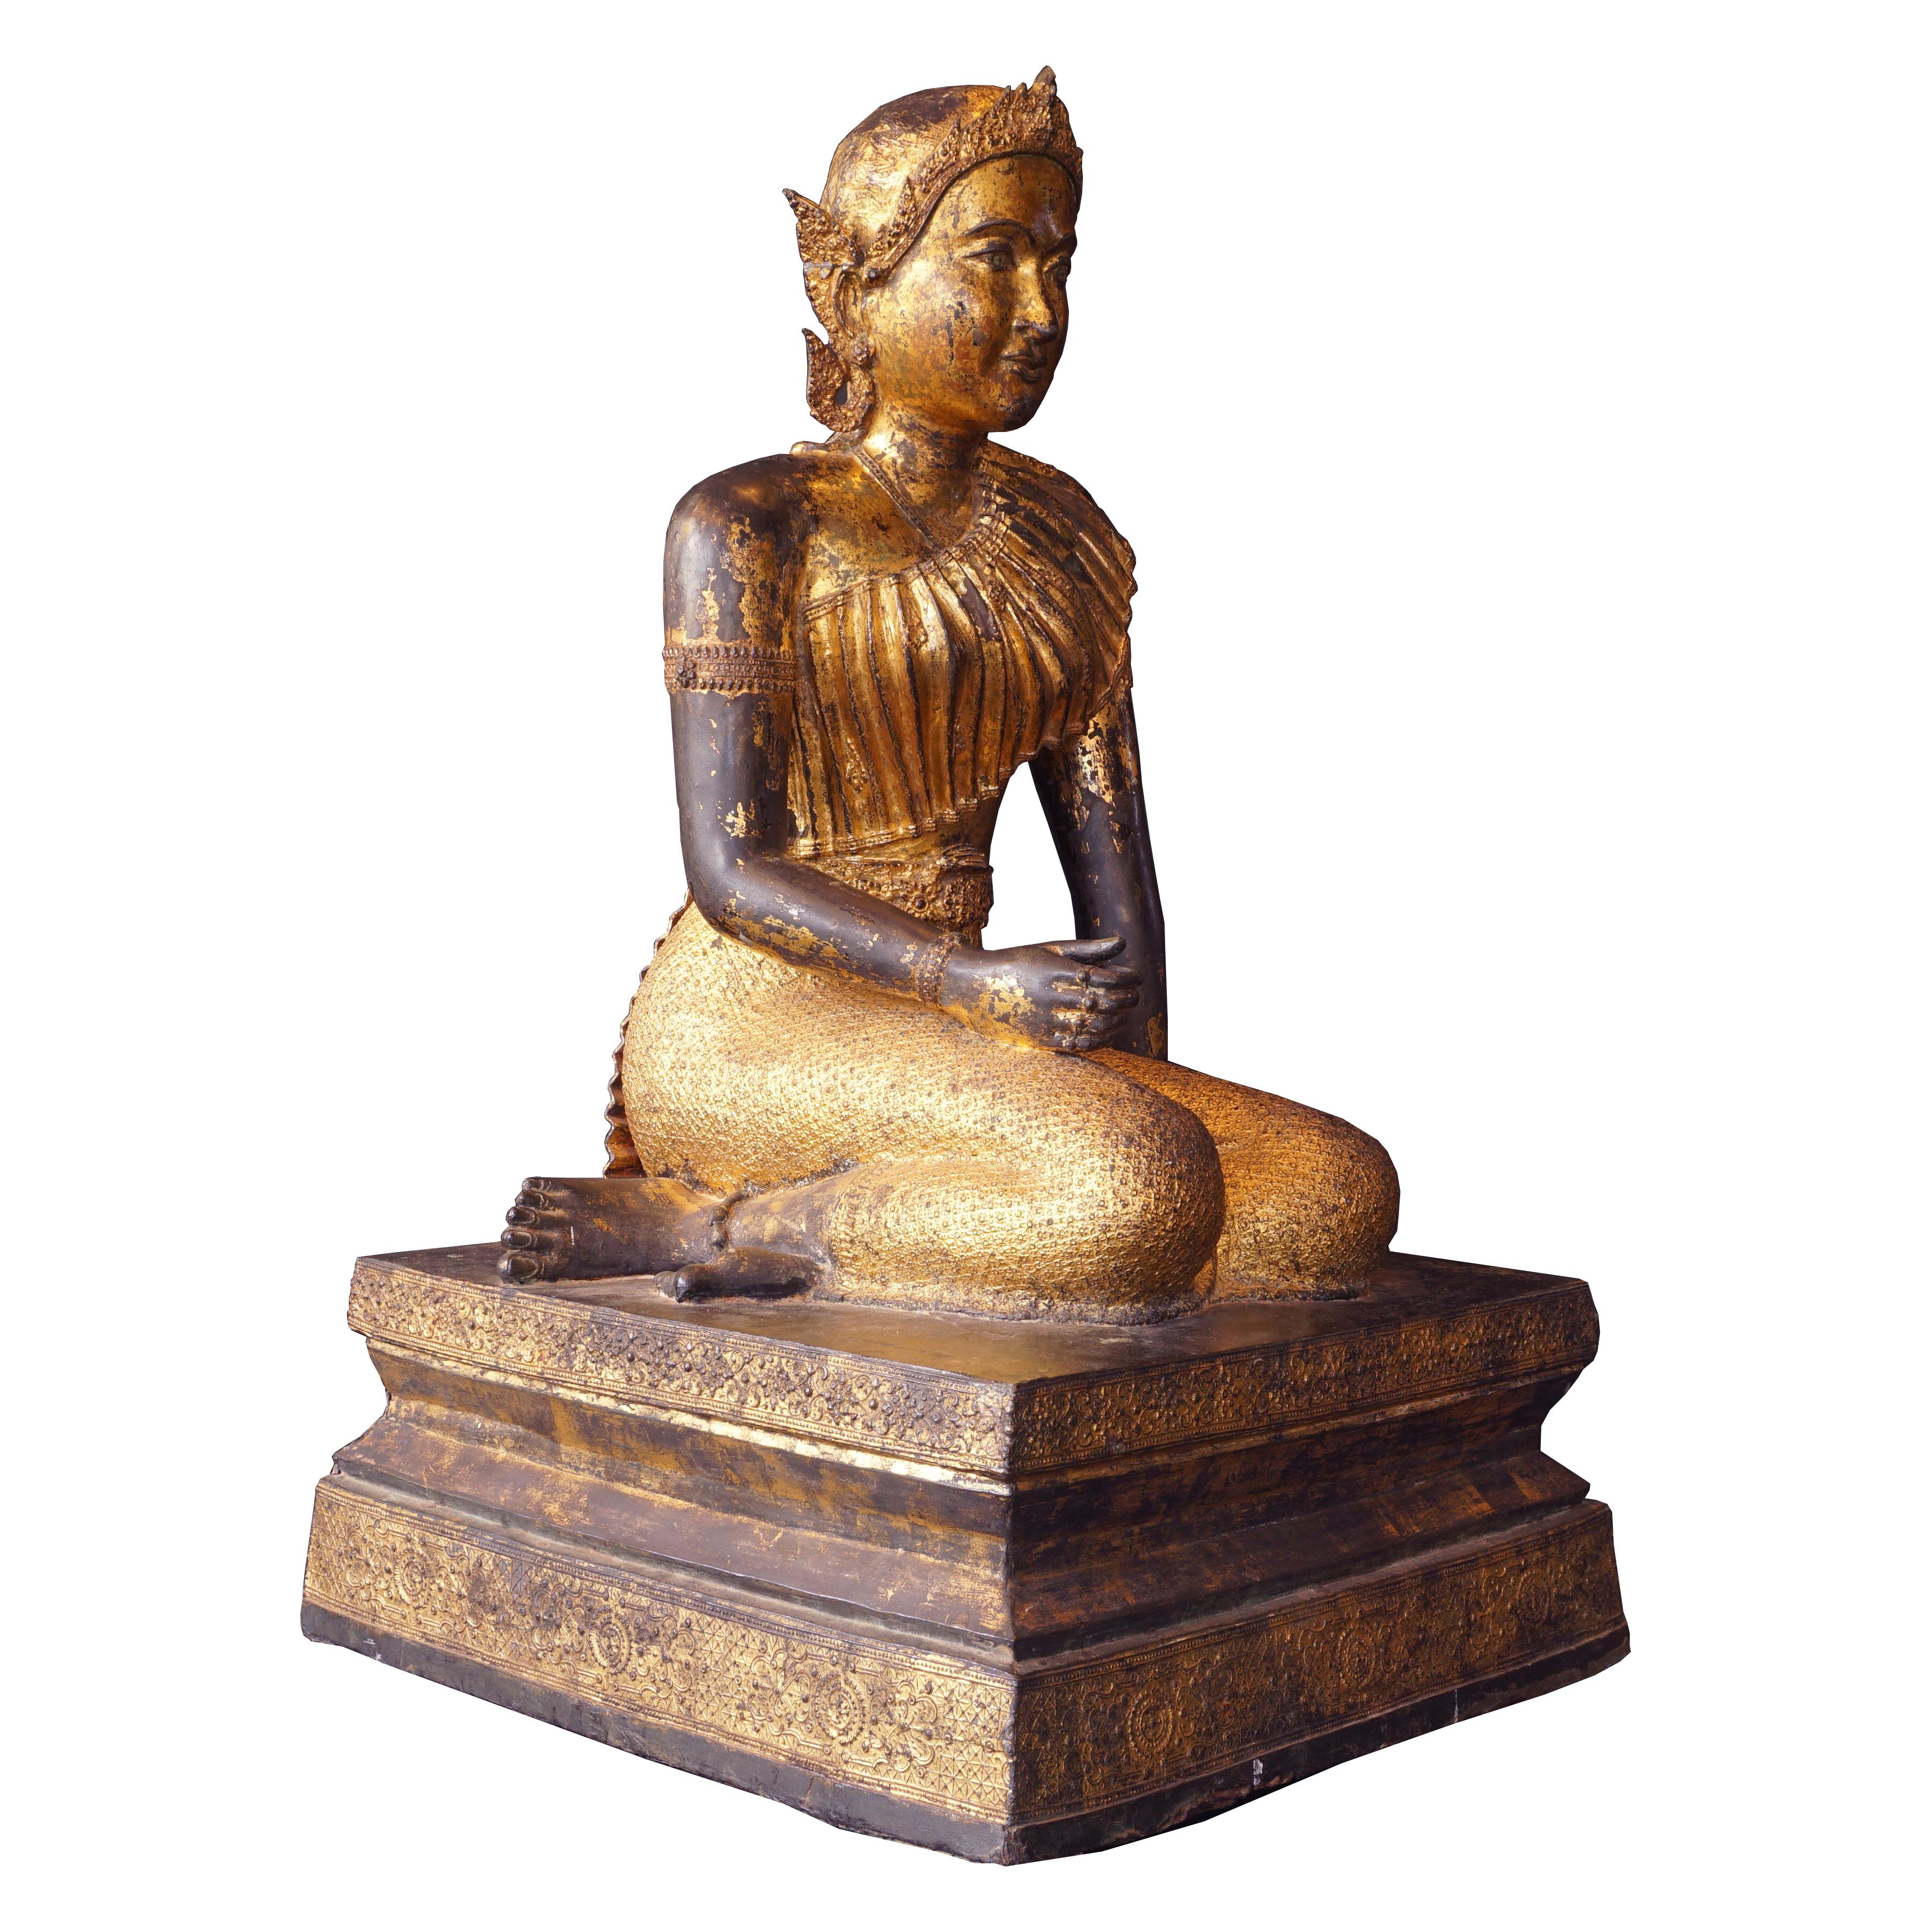 Very large and rare 19th century Rattanakosin gilt bronze statue of Mae Phosop, (Mae Khwan Kaho), Thai Rice Goddess
Made in Bangok
Nice condition. small damage to the right back side
Measures: H: 106 cm. W: 62 cm. D: 65 cm.